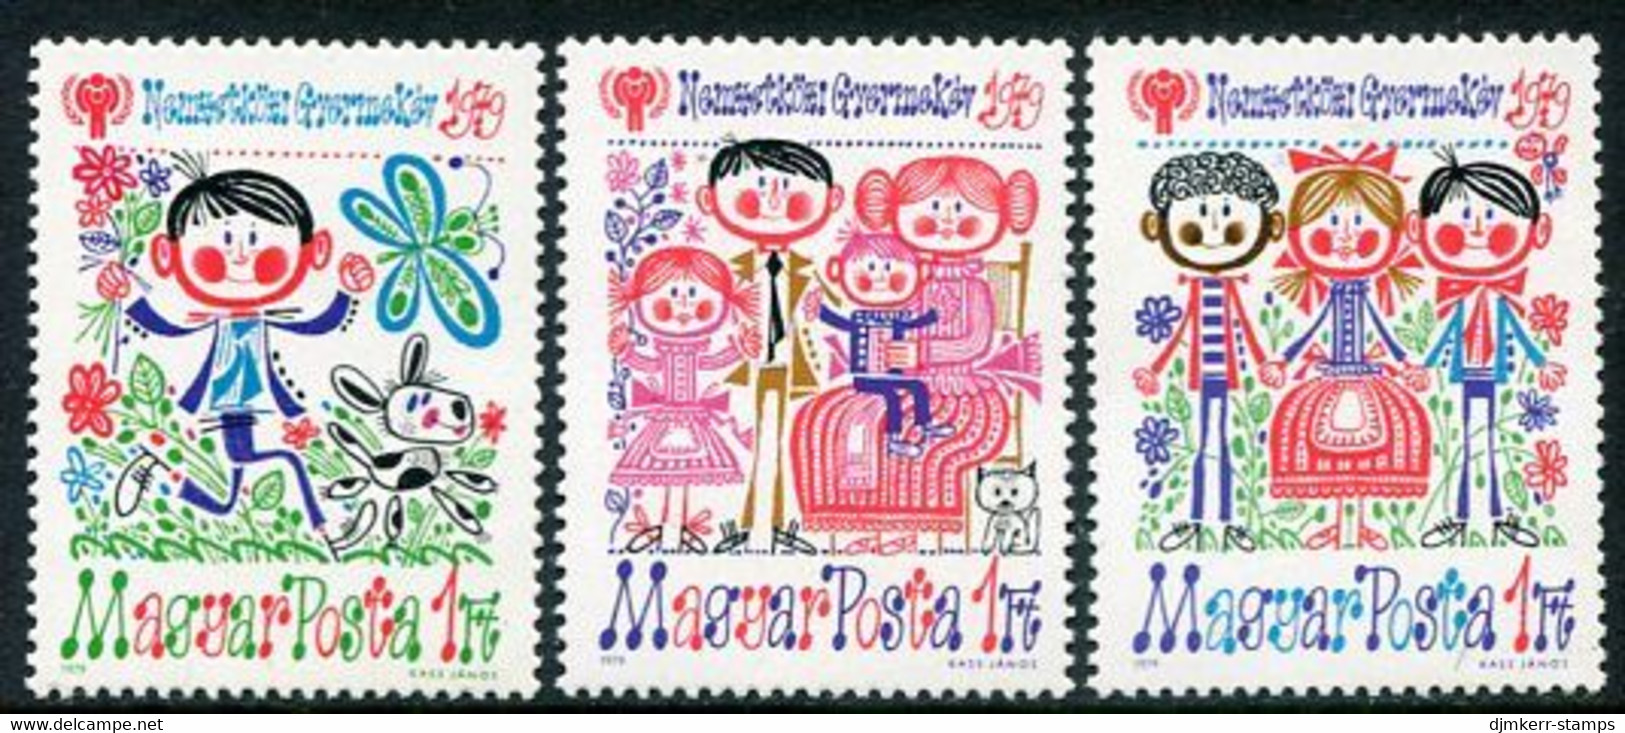 HUNGARY 1979 Year Of The Child MNH / **.  Michel 3335-37 - Nuevos